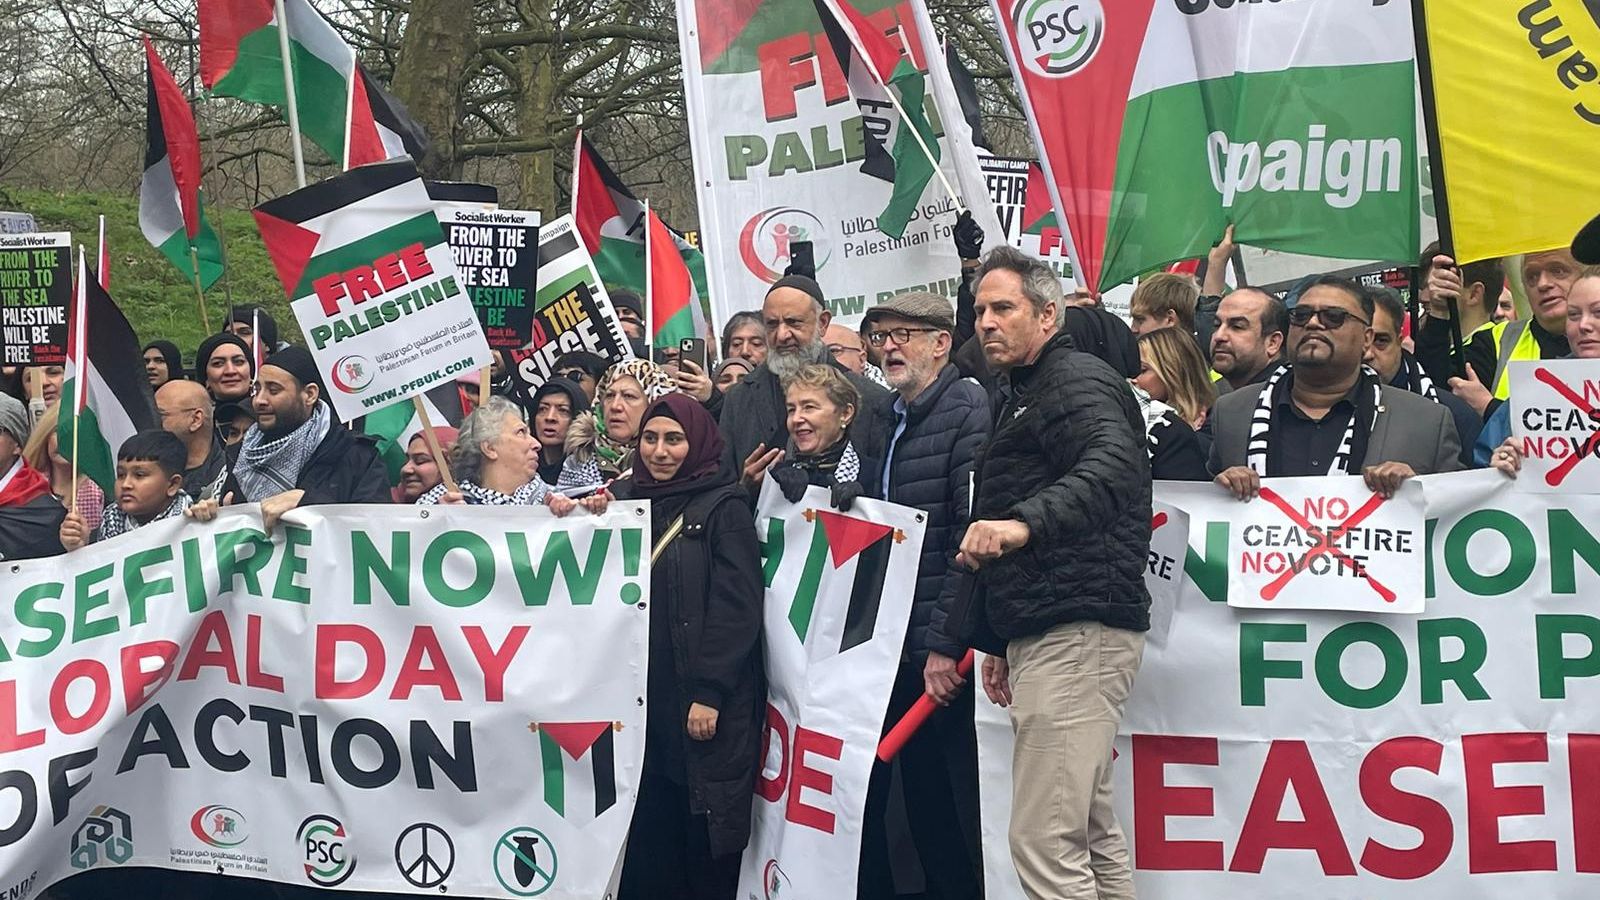 eleven people arrested at pro-palestine demonstration in london